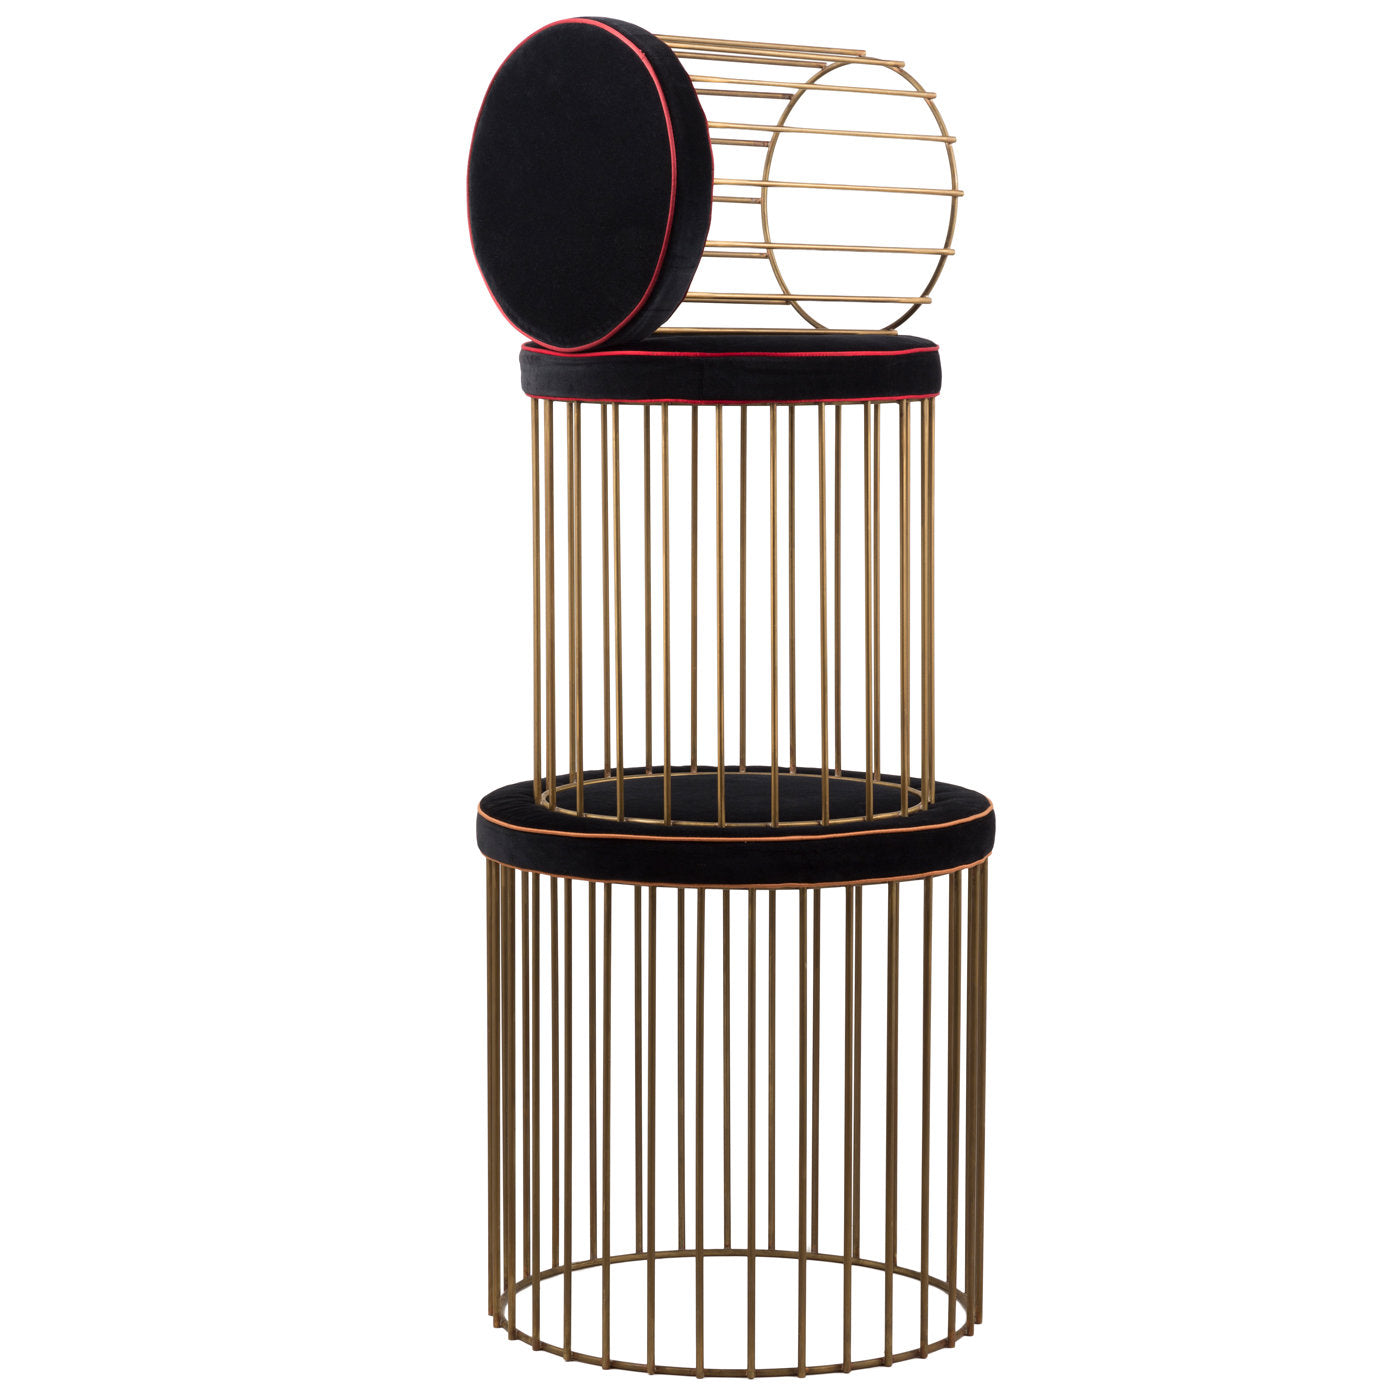 Set of 3 Brass Cage Stools - Alternative view 1